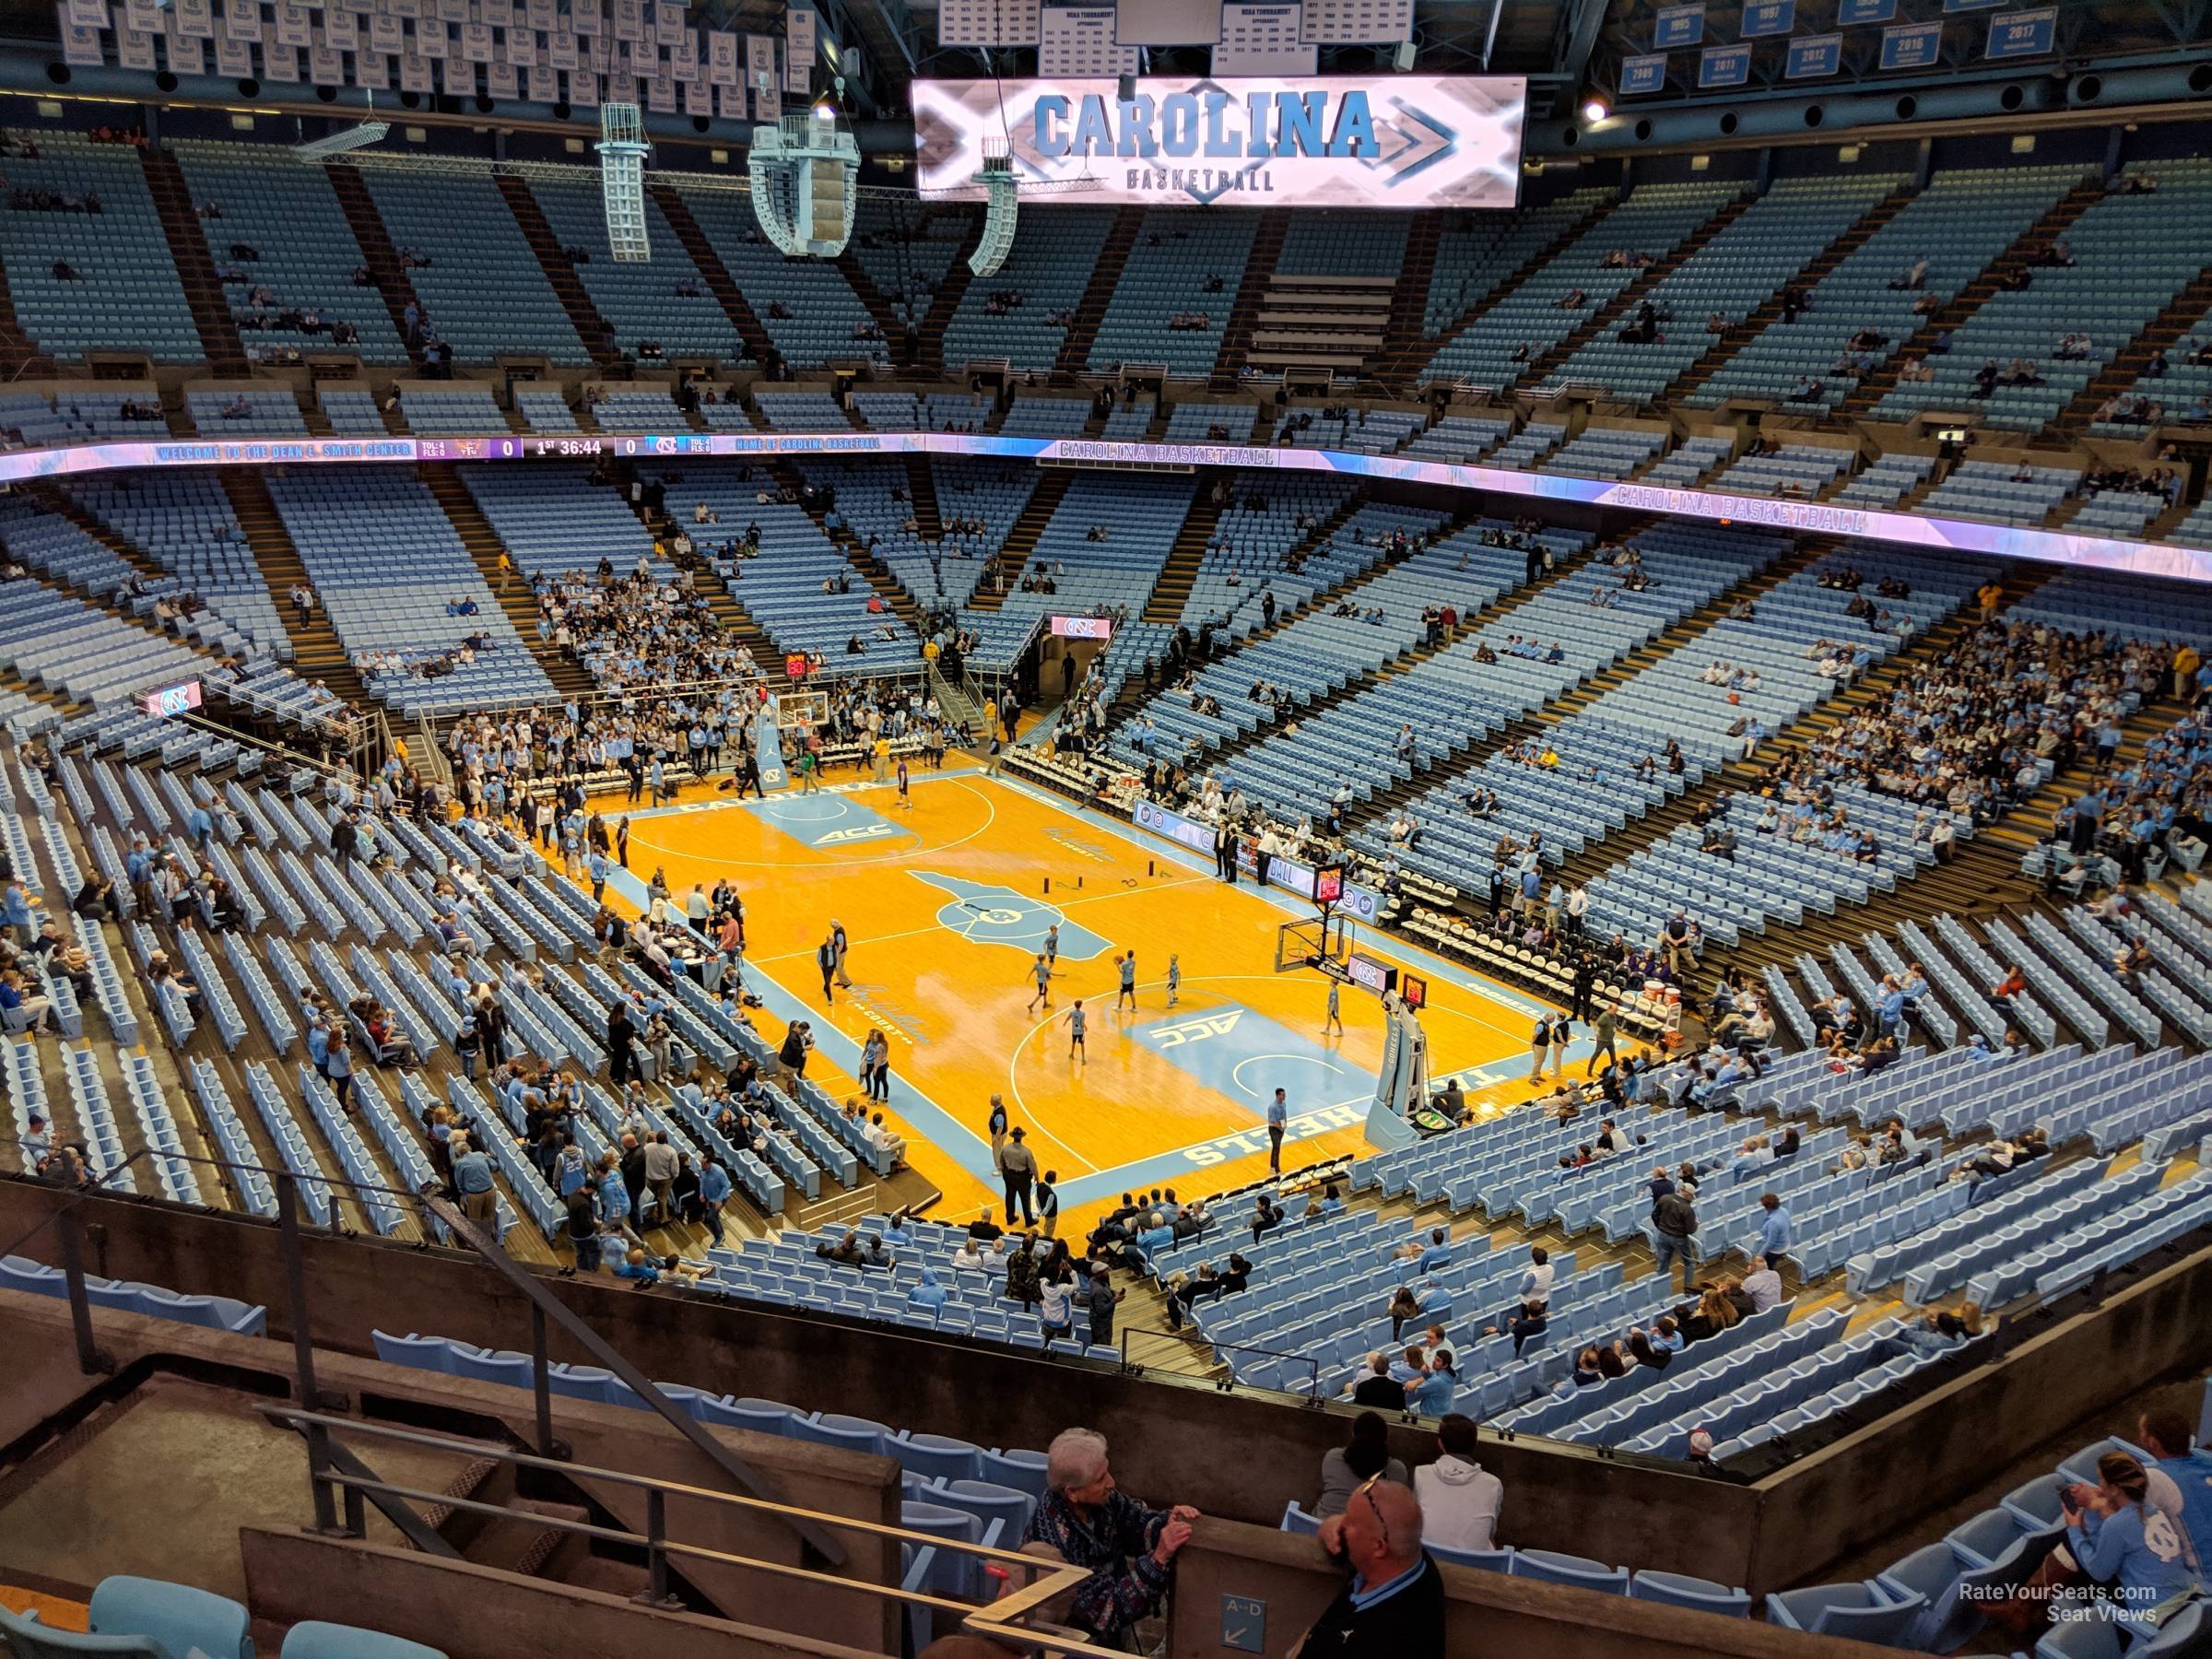 section 231, row i seat view  - dean smith center